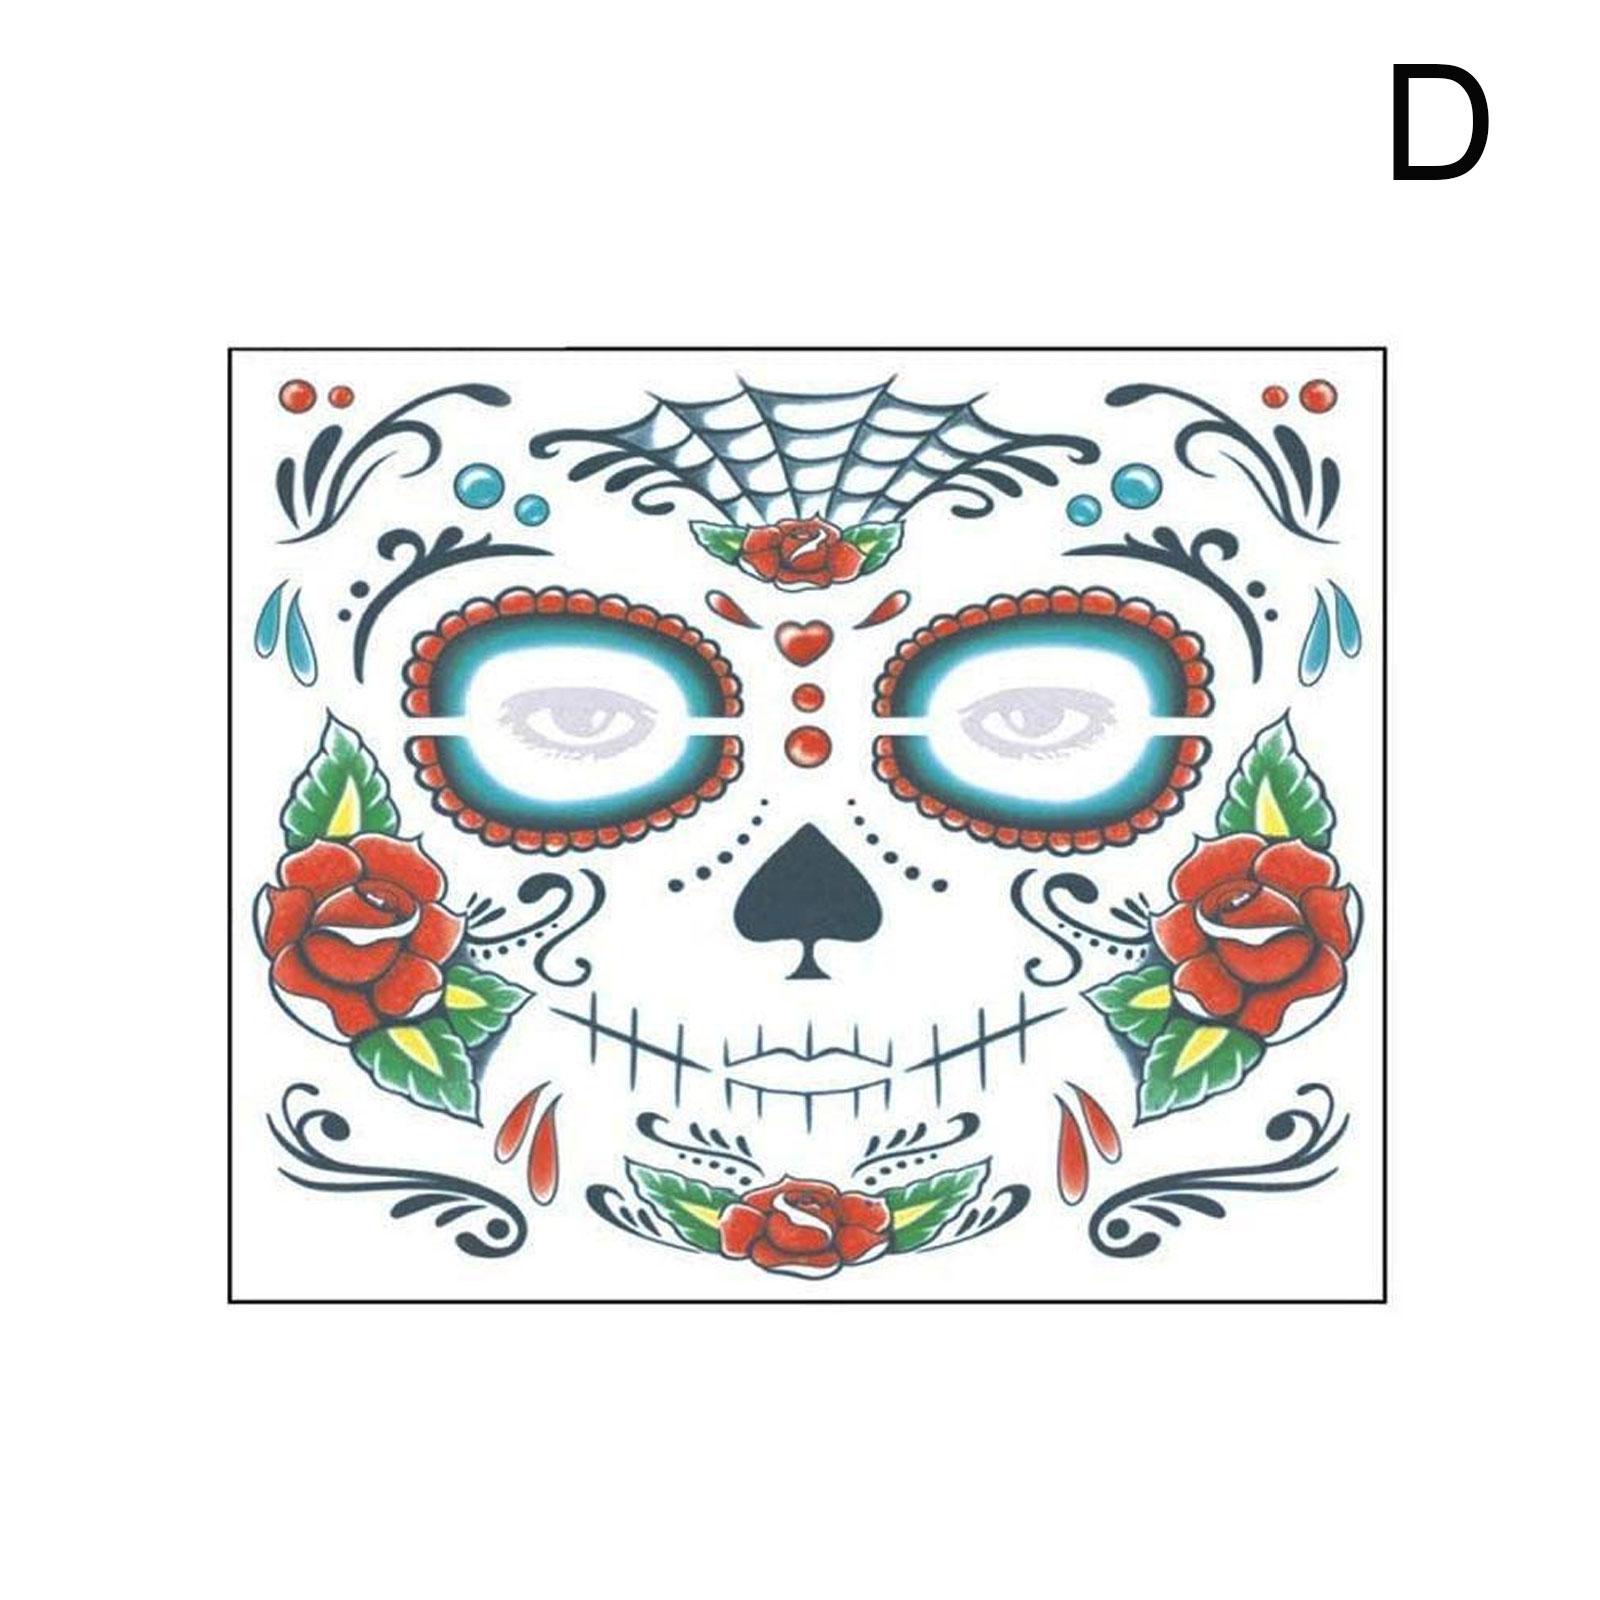 Waterproof Facial Makeup Sticker Special Face tattoo Day Of The Dead Skull Face Dress Up Halloween Temporary Tattoo Stickers